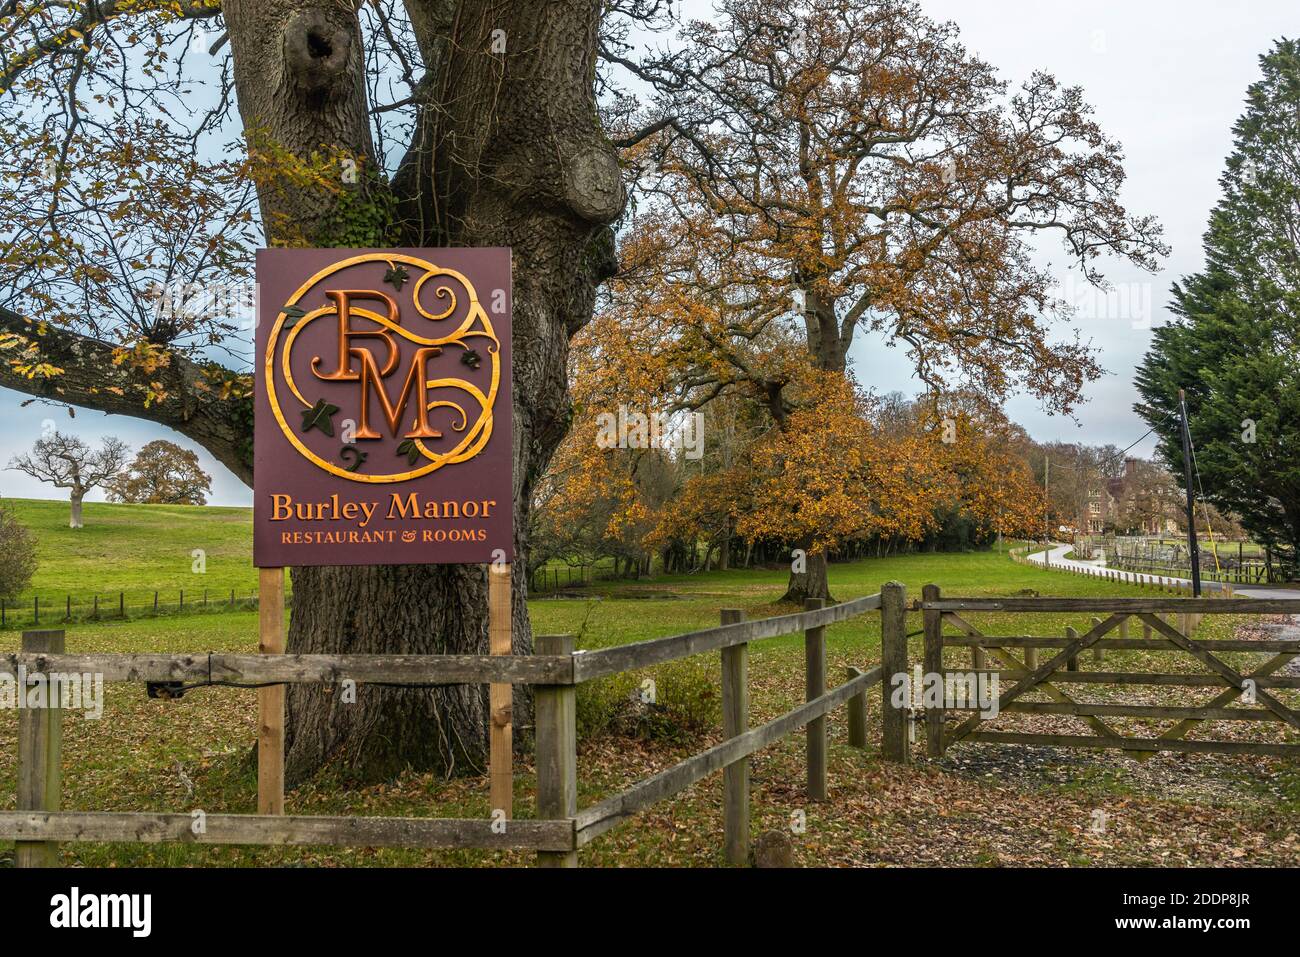 Entrance sign to Burley Manor house during autumn, Burley Manor is a 4 star hotel and restaurant in the New Forest, Hampshire, England, UK Stock Photo